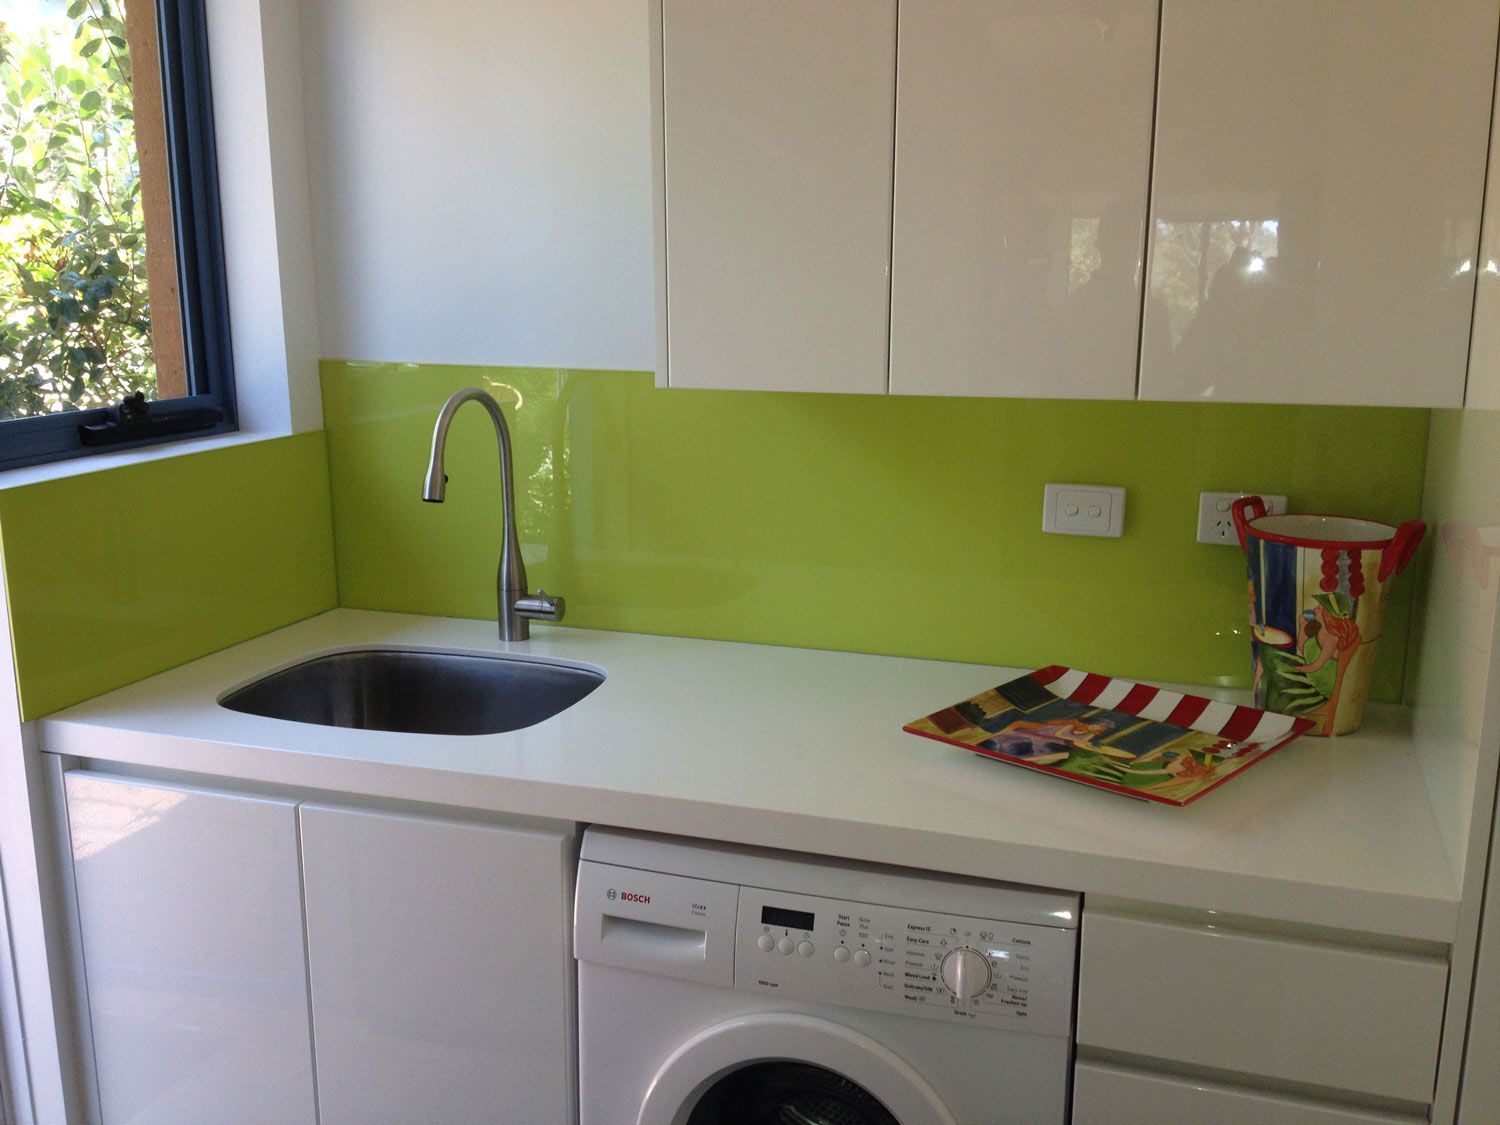 A Laundry Room with White and Green Paint — South Coast Glass in Shoalhaven, NSW